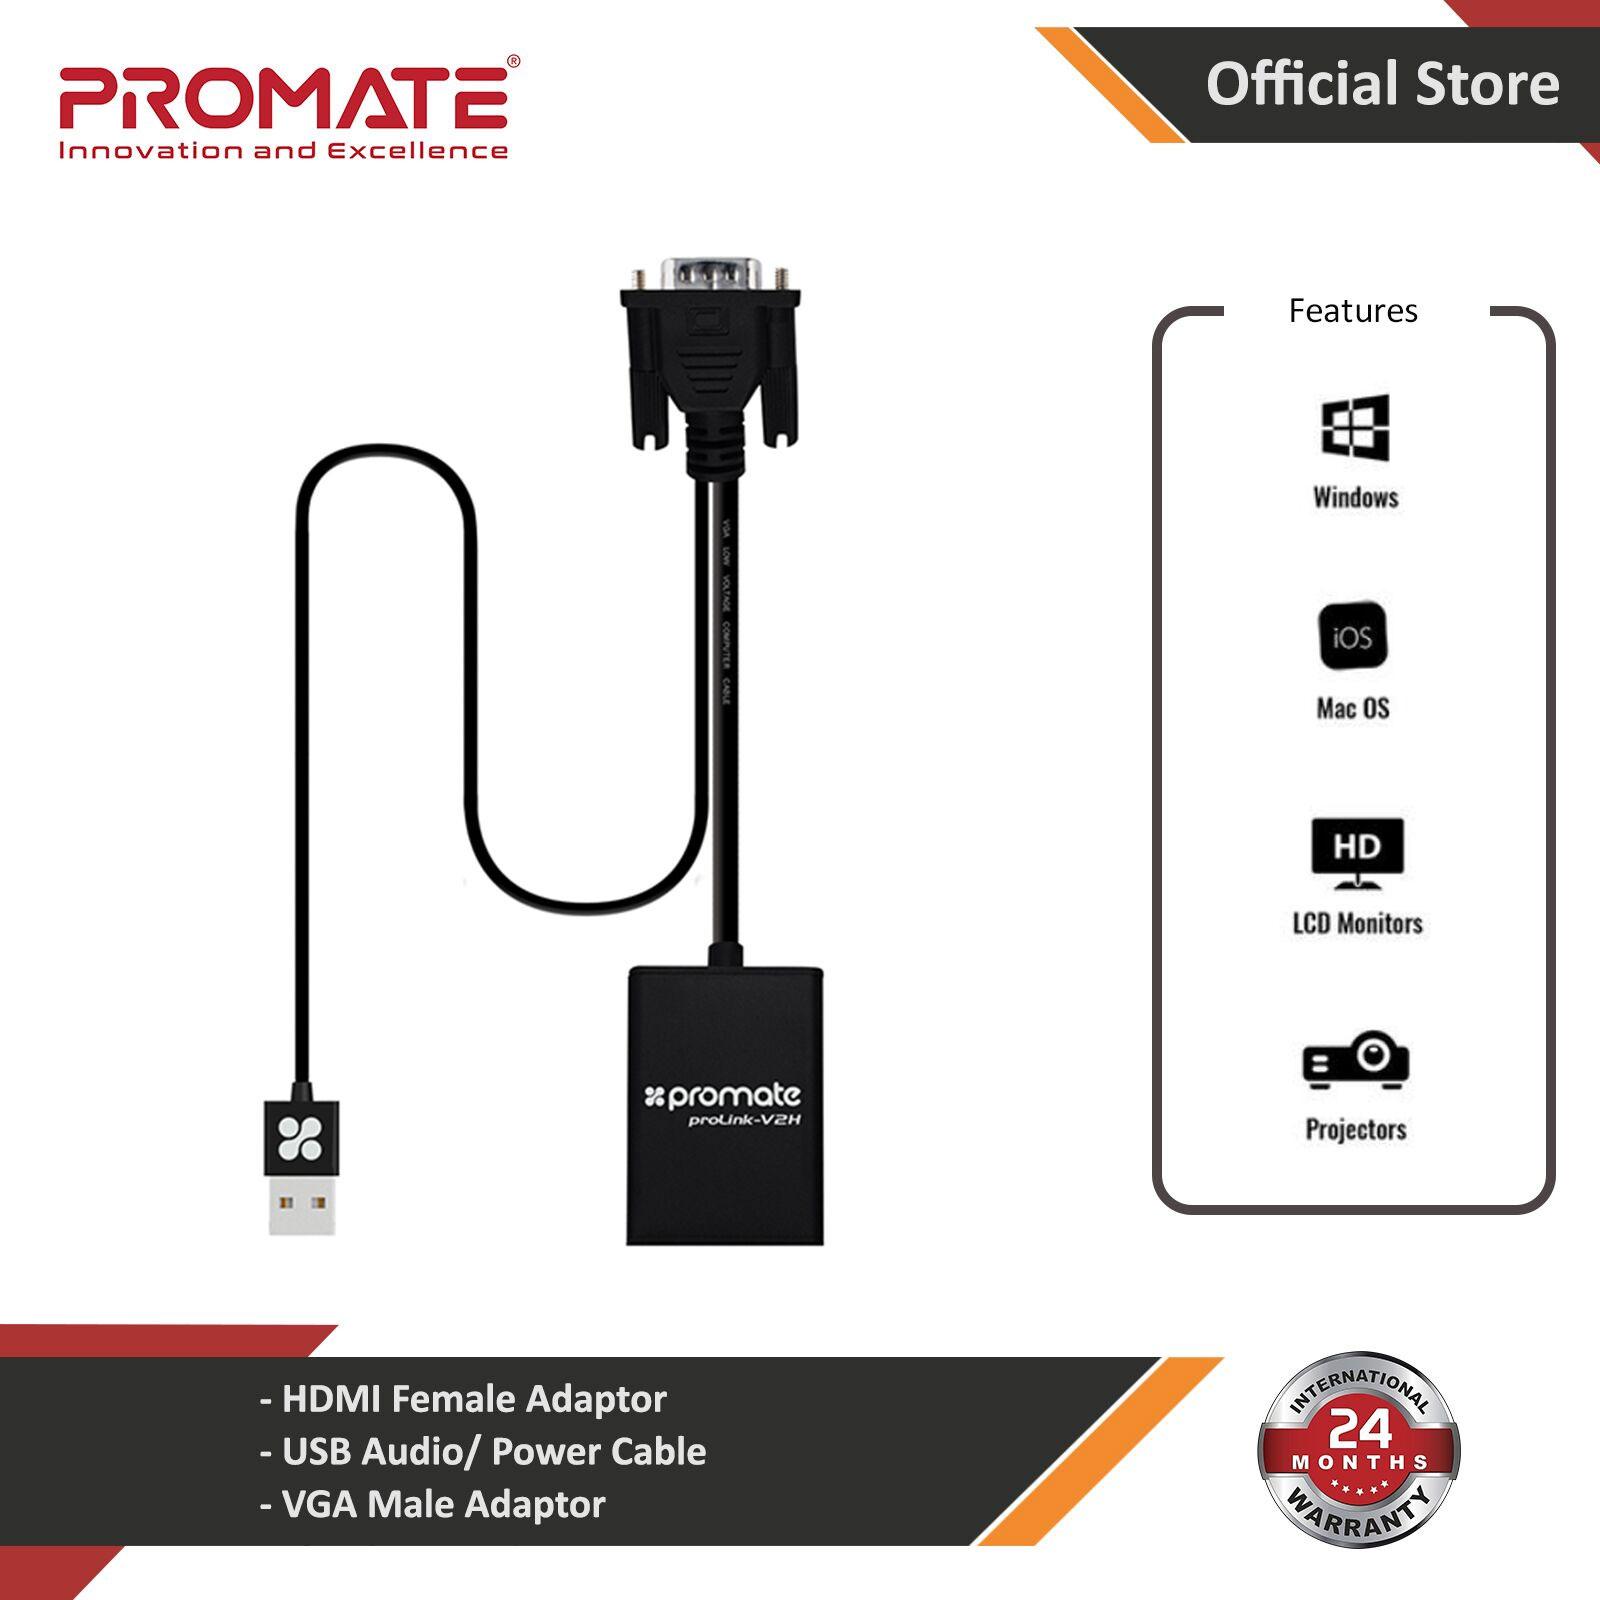 Picture of Promate VGA to HDMI Adapter Video Cable Converter Adapter Kit Plug and Play with Audio Support Red Design- Red Design Cases, Red Design Covers, iPad Cases and a wide selection of Red Design Accessories in Malaysia, Sabah, Sarawak and Singapore 